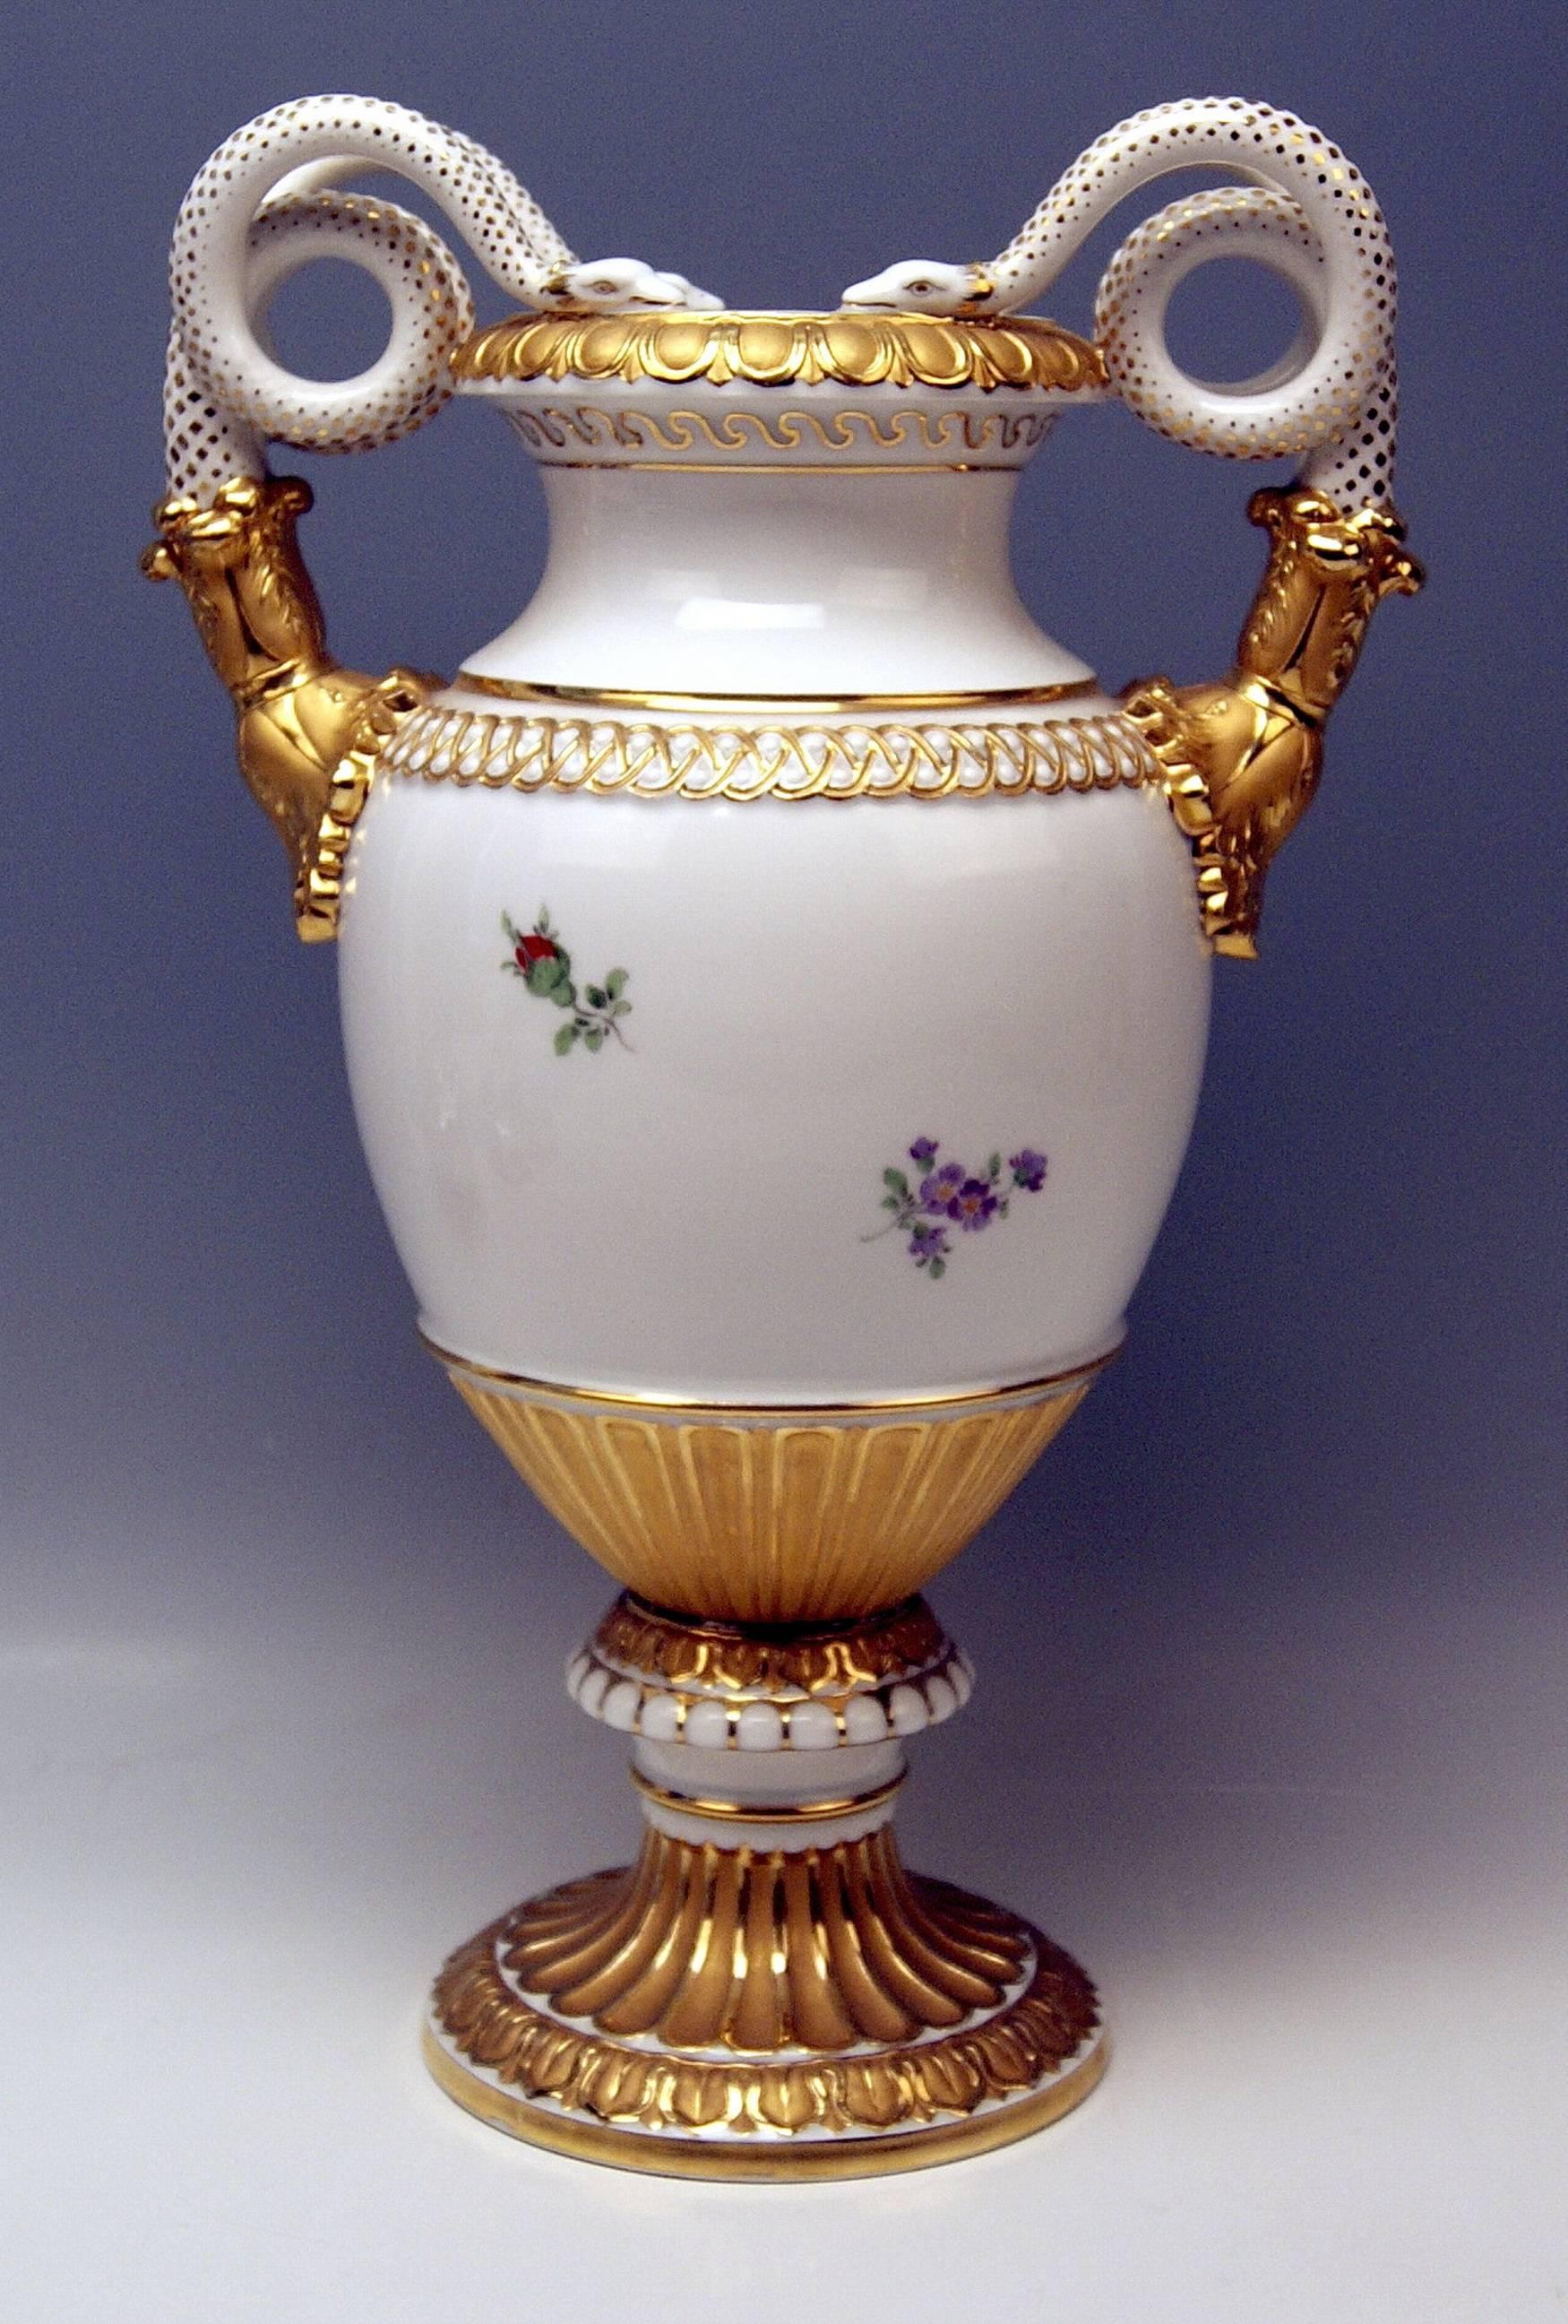 Meissen outstanding quite tall snake handles vase.

Measures:
Height 38.5 cm (= 15.15 inches) 
width (measured from one handle to other) 24.0 cm (= 9.44 inches)
diameter of round foot 14 cm (= 5.51 inches) 

Manufactory: Meissen
Hallmarked: